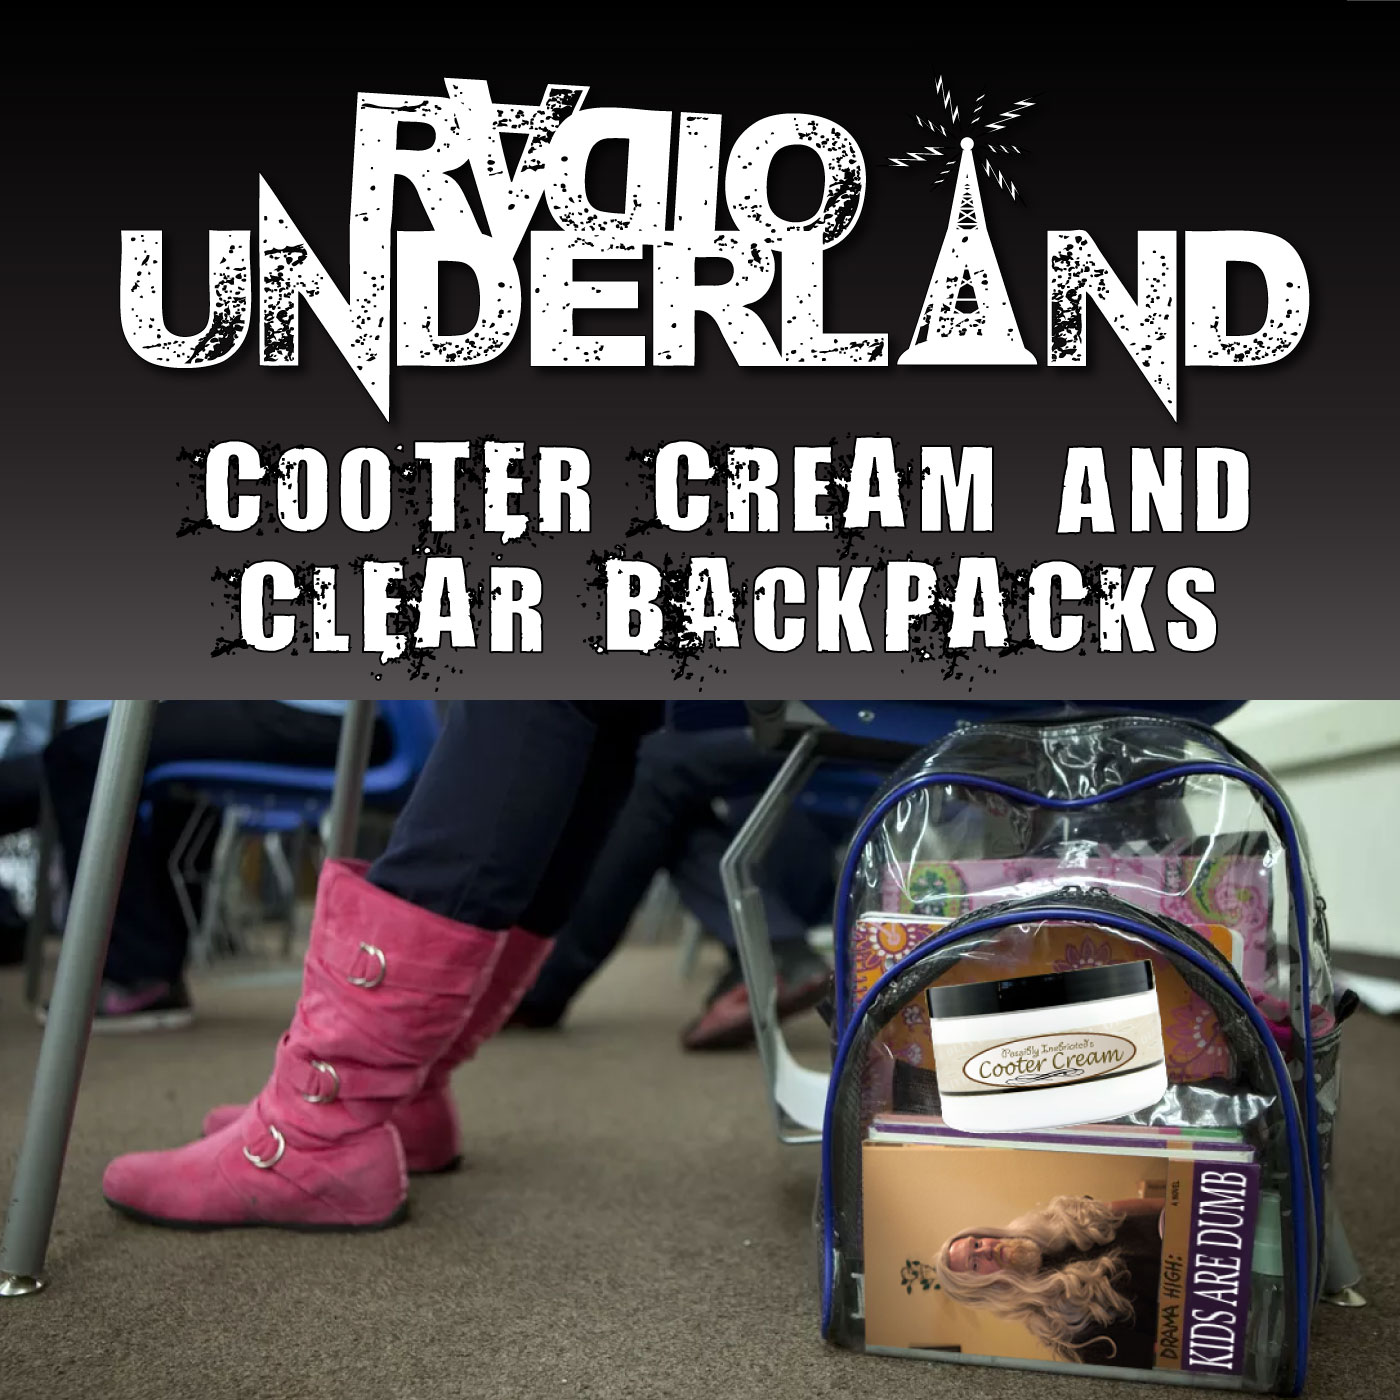 Cooter Cream and Clear Backpacks